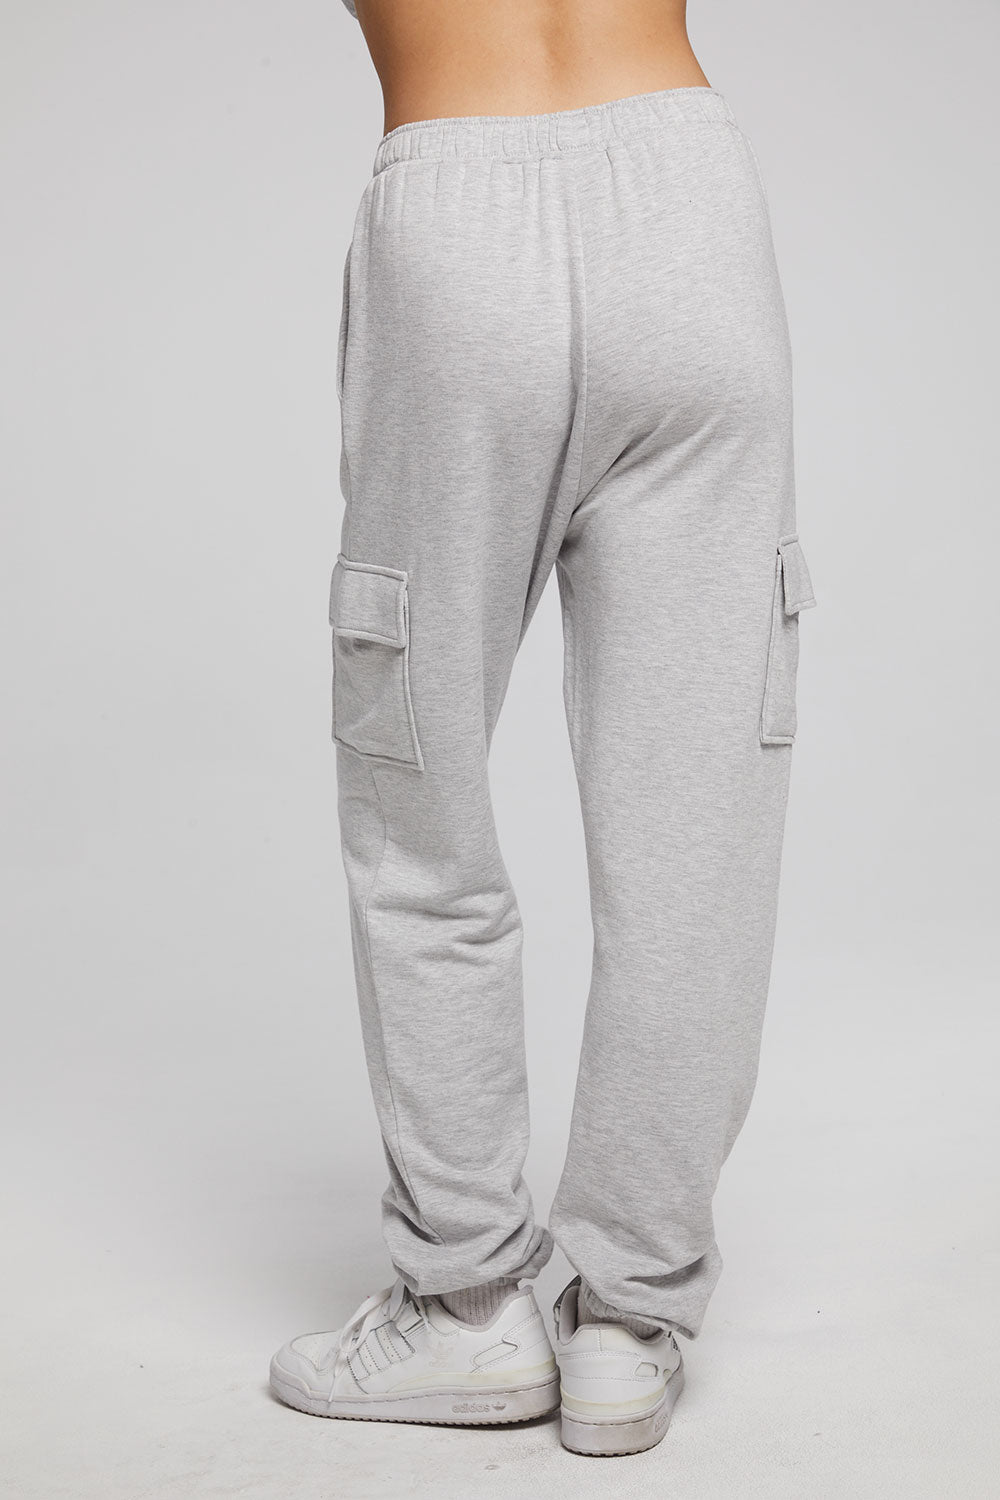 Claude Heather Grey Jogger WOMENS chaserbrand